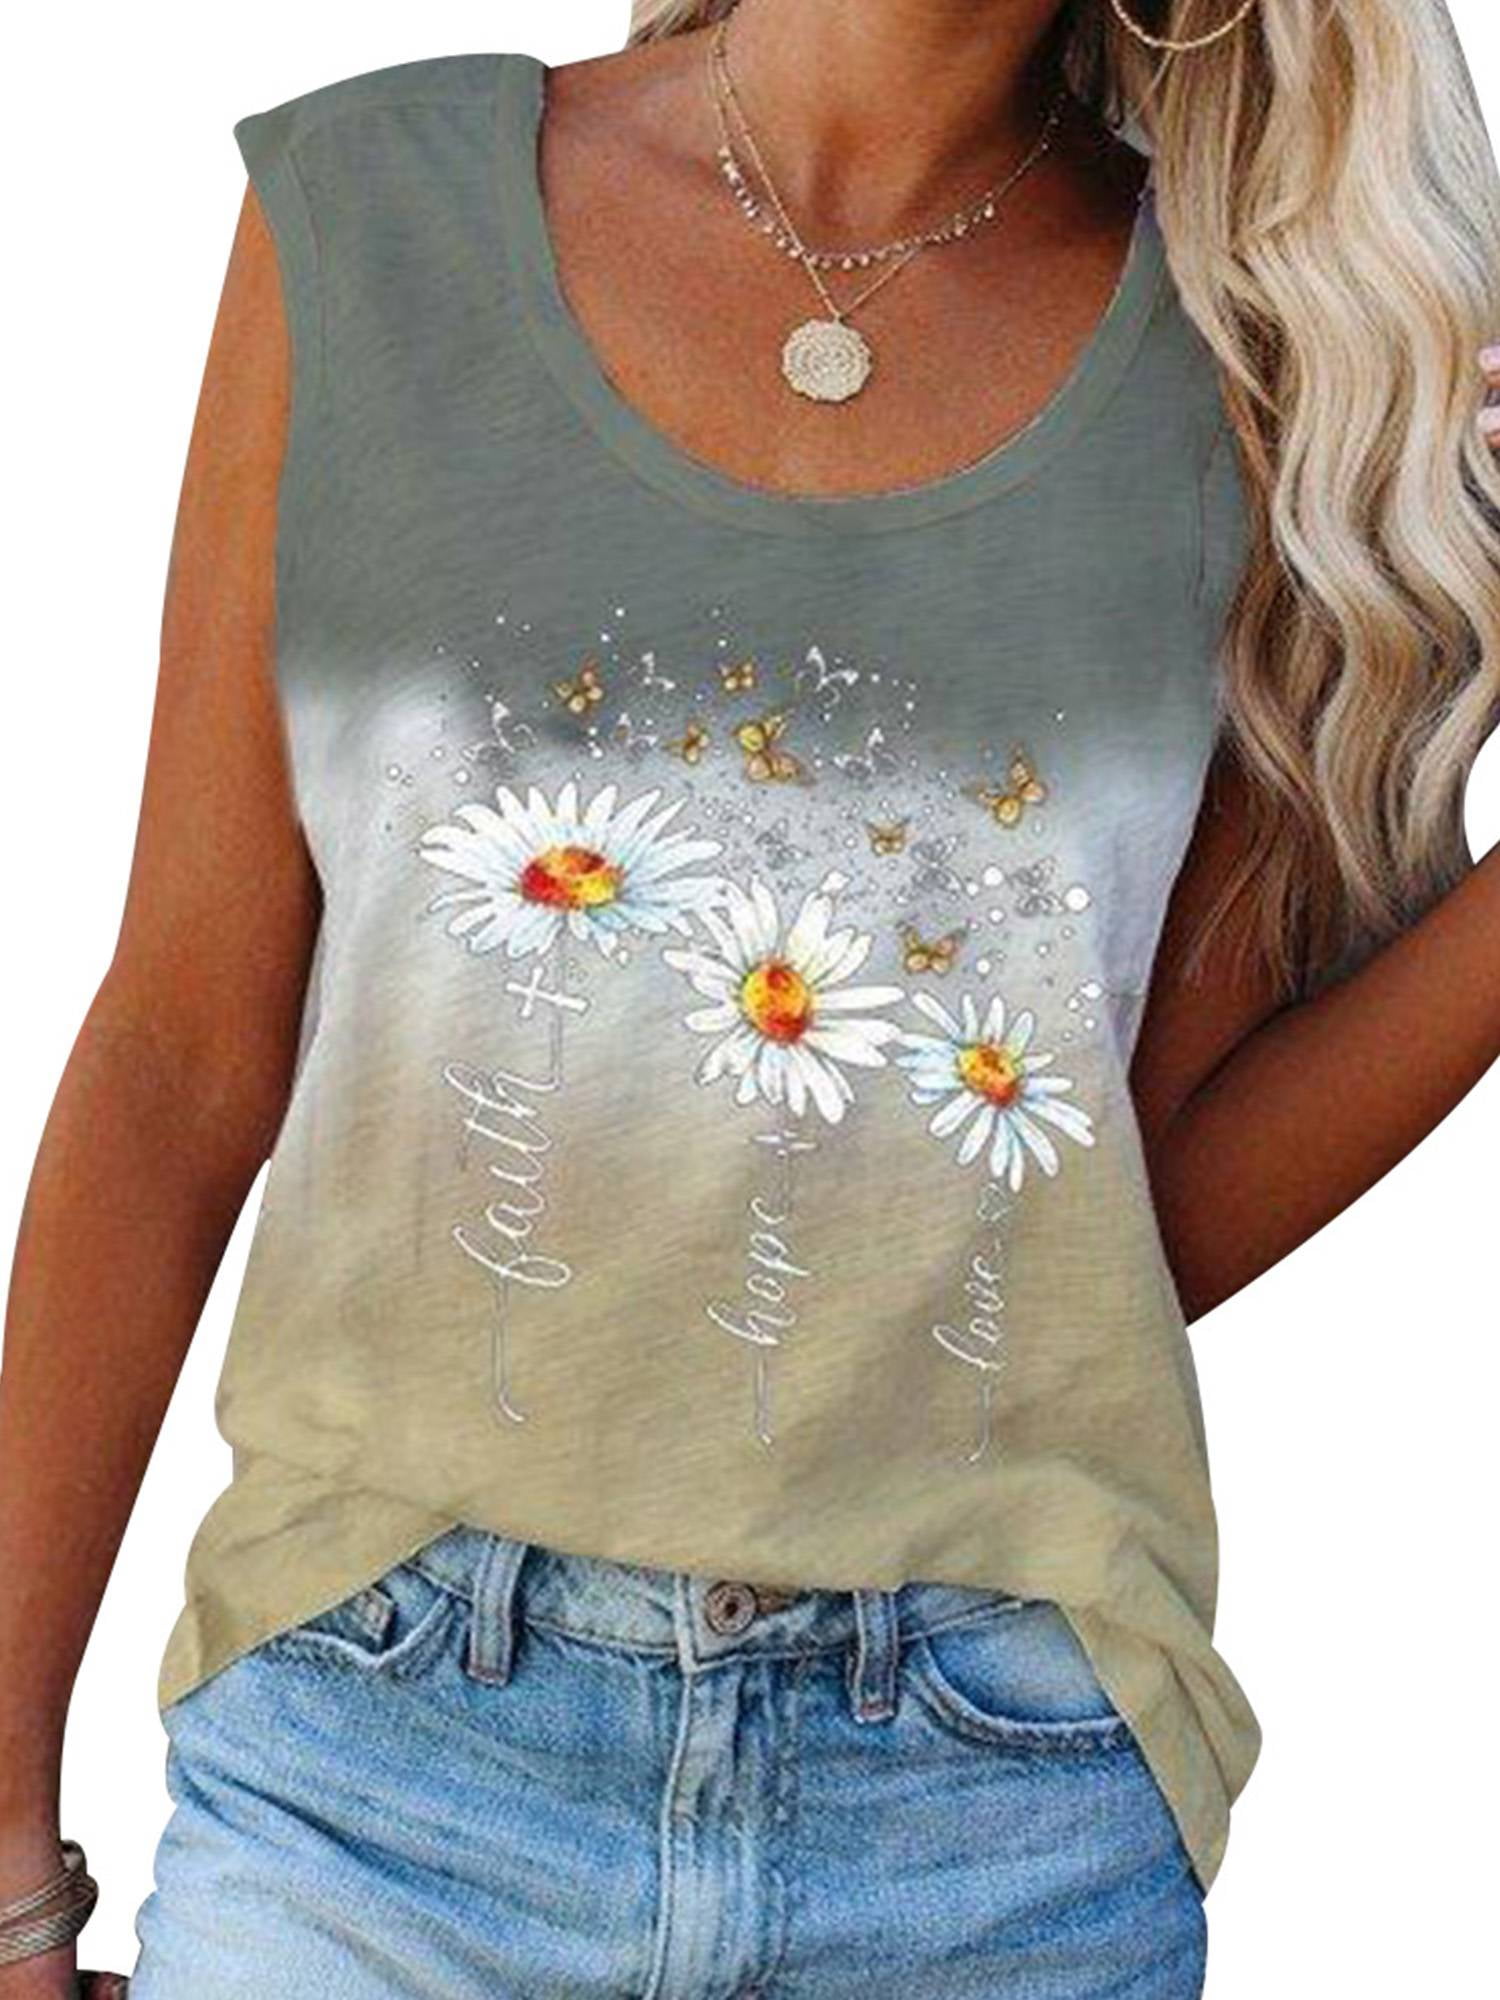 Enwejyy Women Summer Floral Print Round Neck Sleeveless Casual Tank Top ...